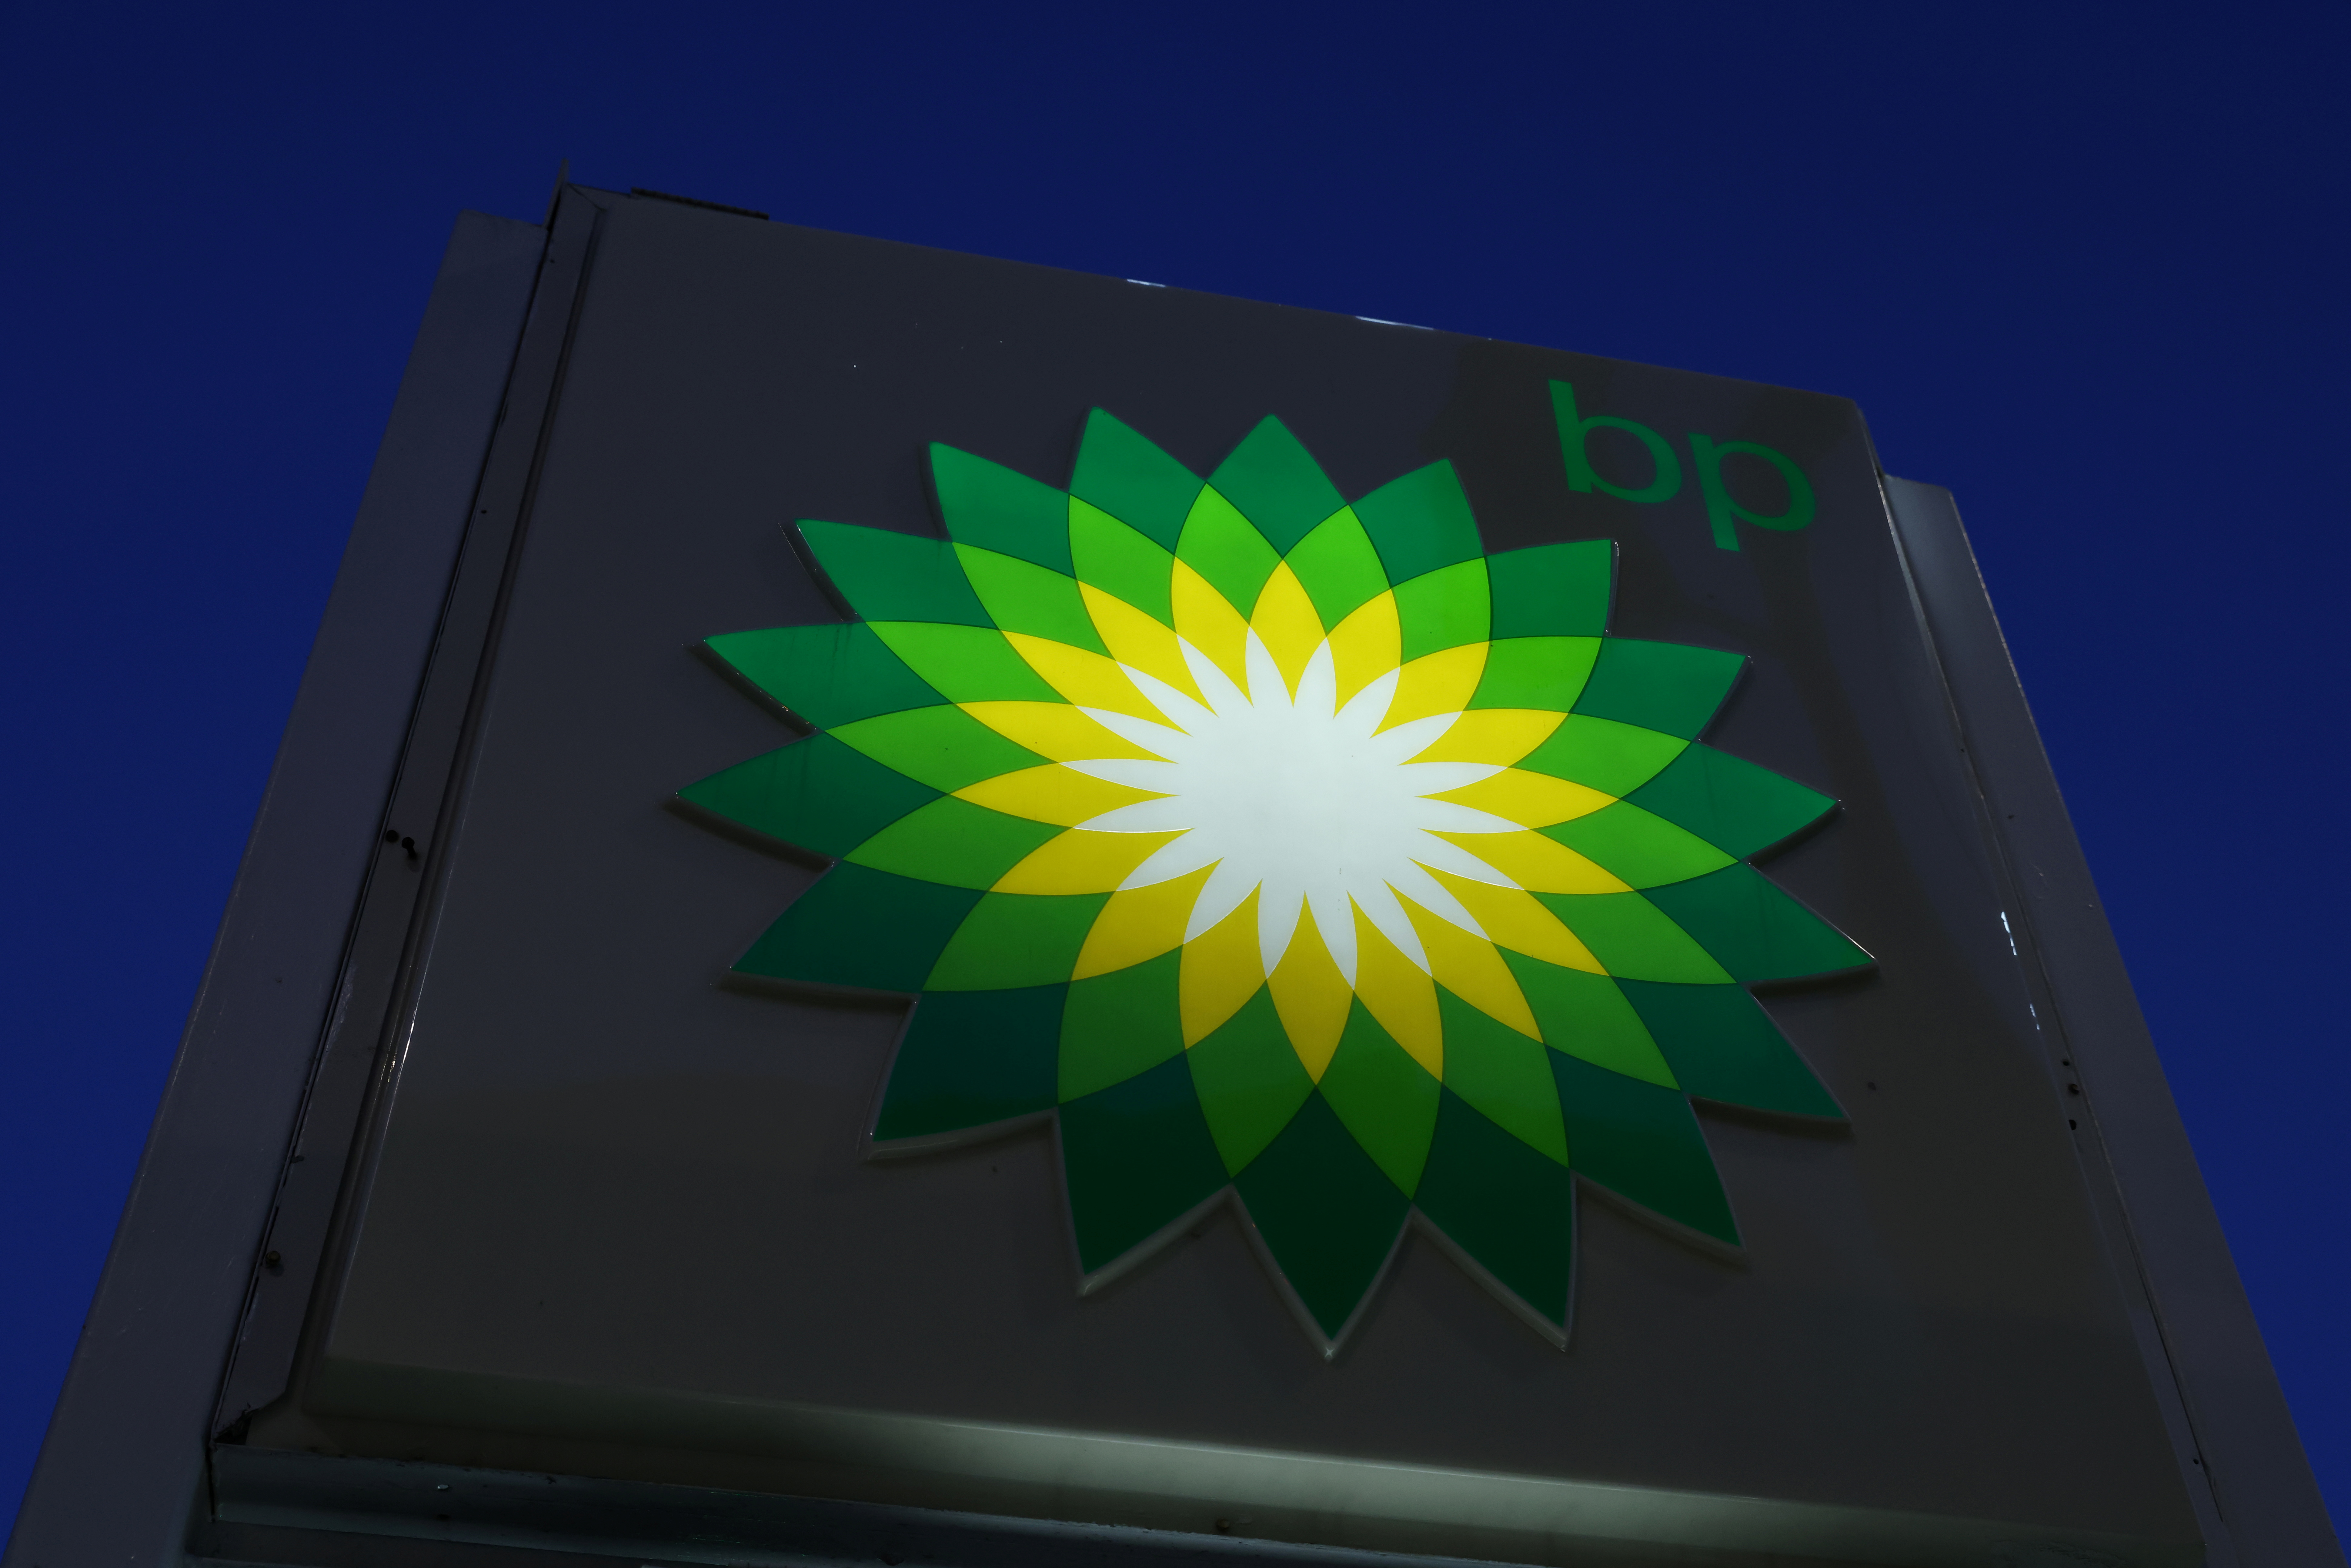 The BP logo is seen at a BP gas station in Manhattan, New York City, U.S., November 24, 2021. REUTERS/Andrew Kelly